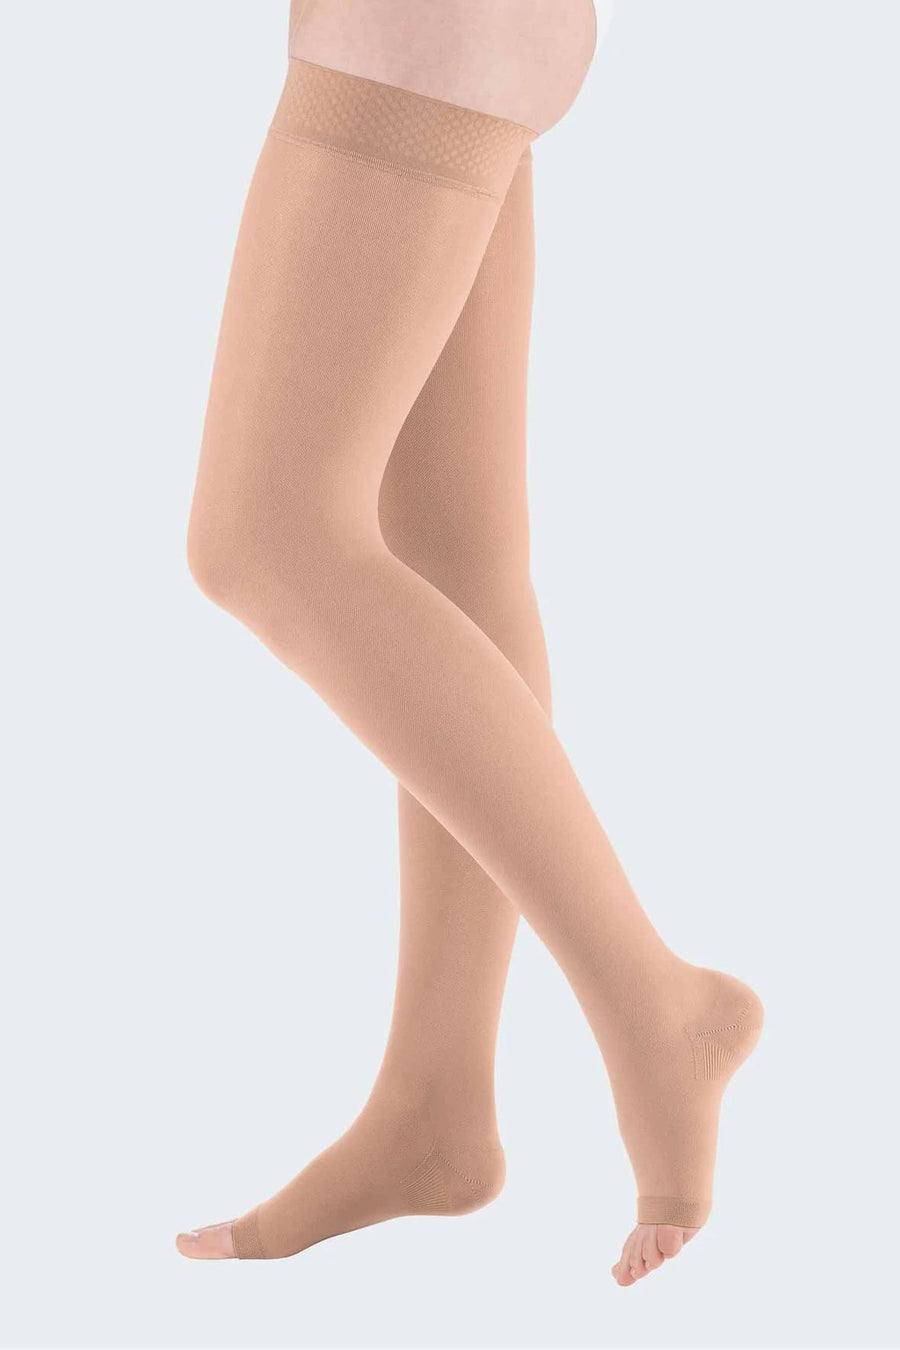 Medical compression socks-knee high open toes with zipper CLASS 1  (18-21)mmhg - Softmed Australia